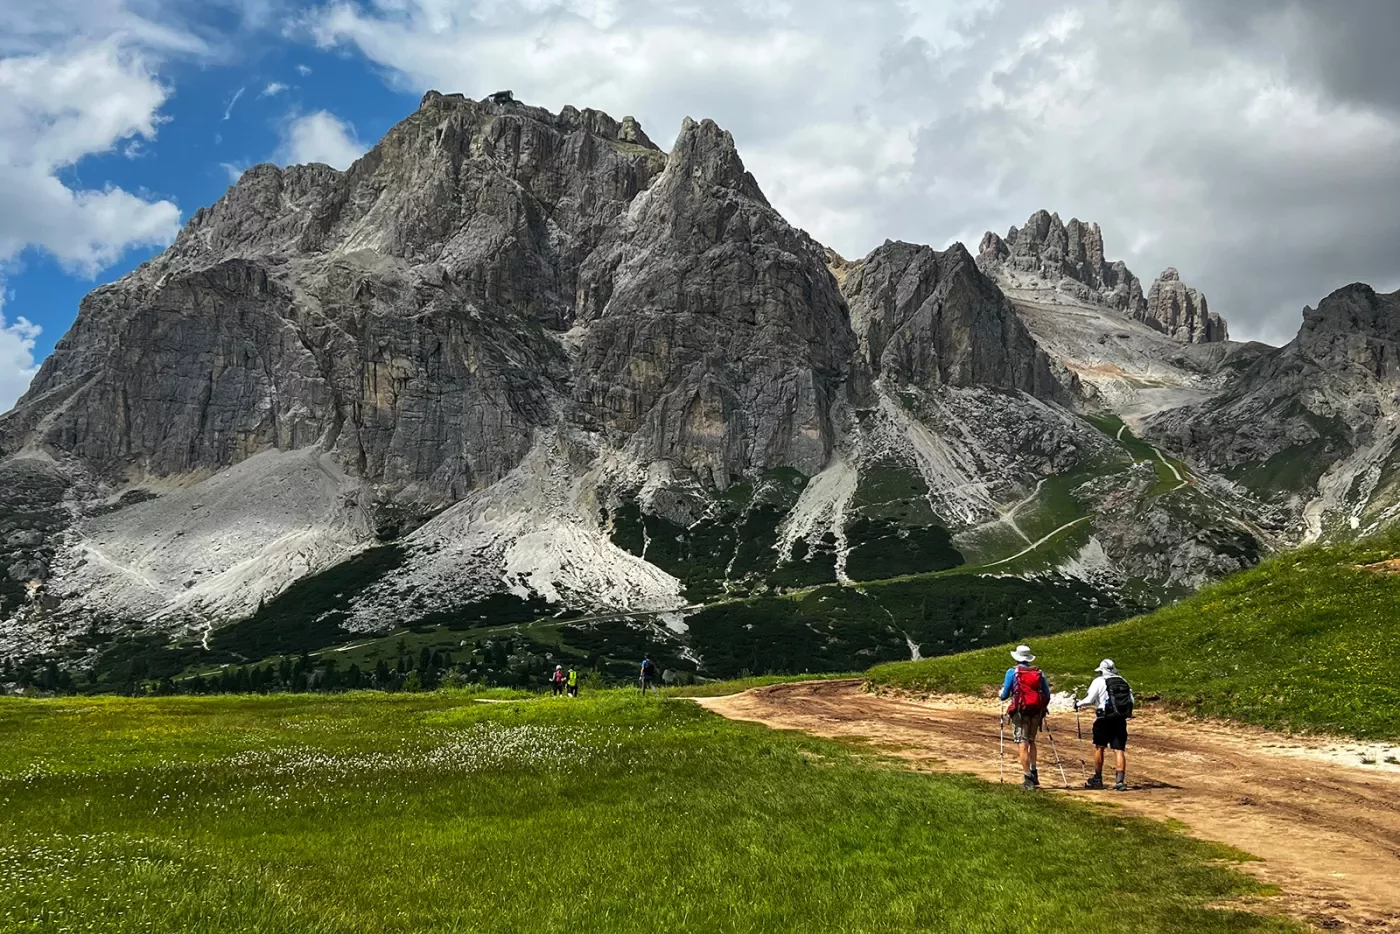 Two guests on trail, hiking towards large mountain in front of them.